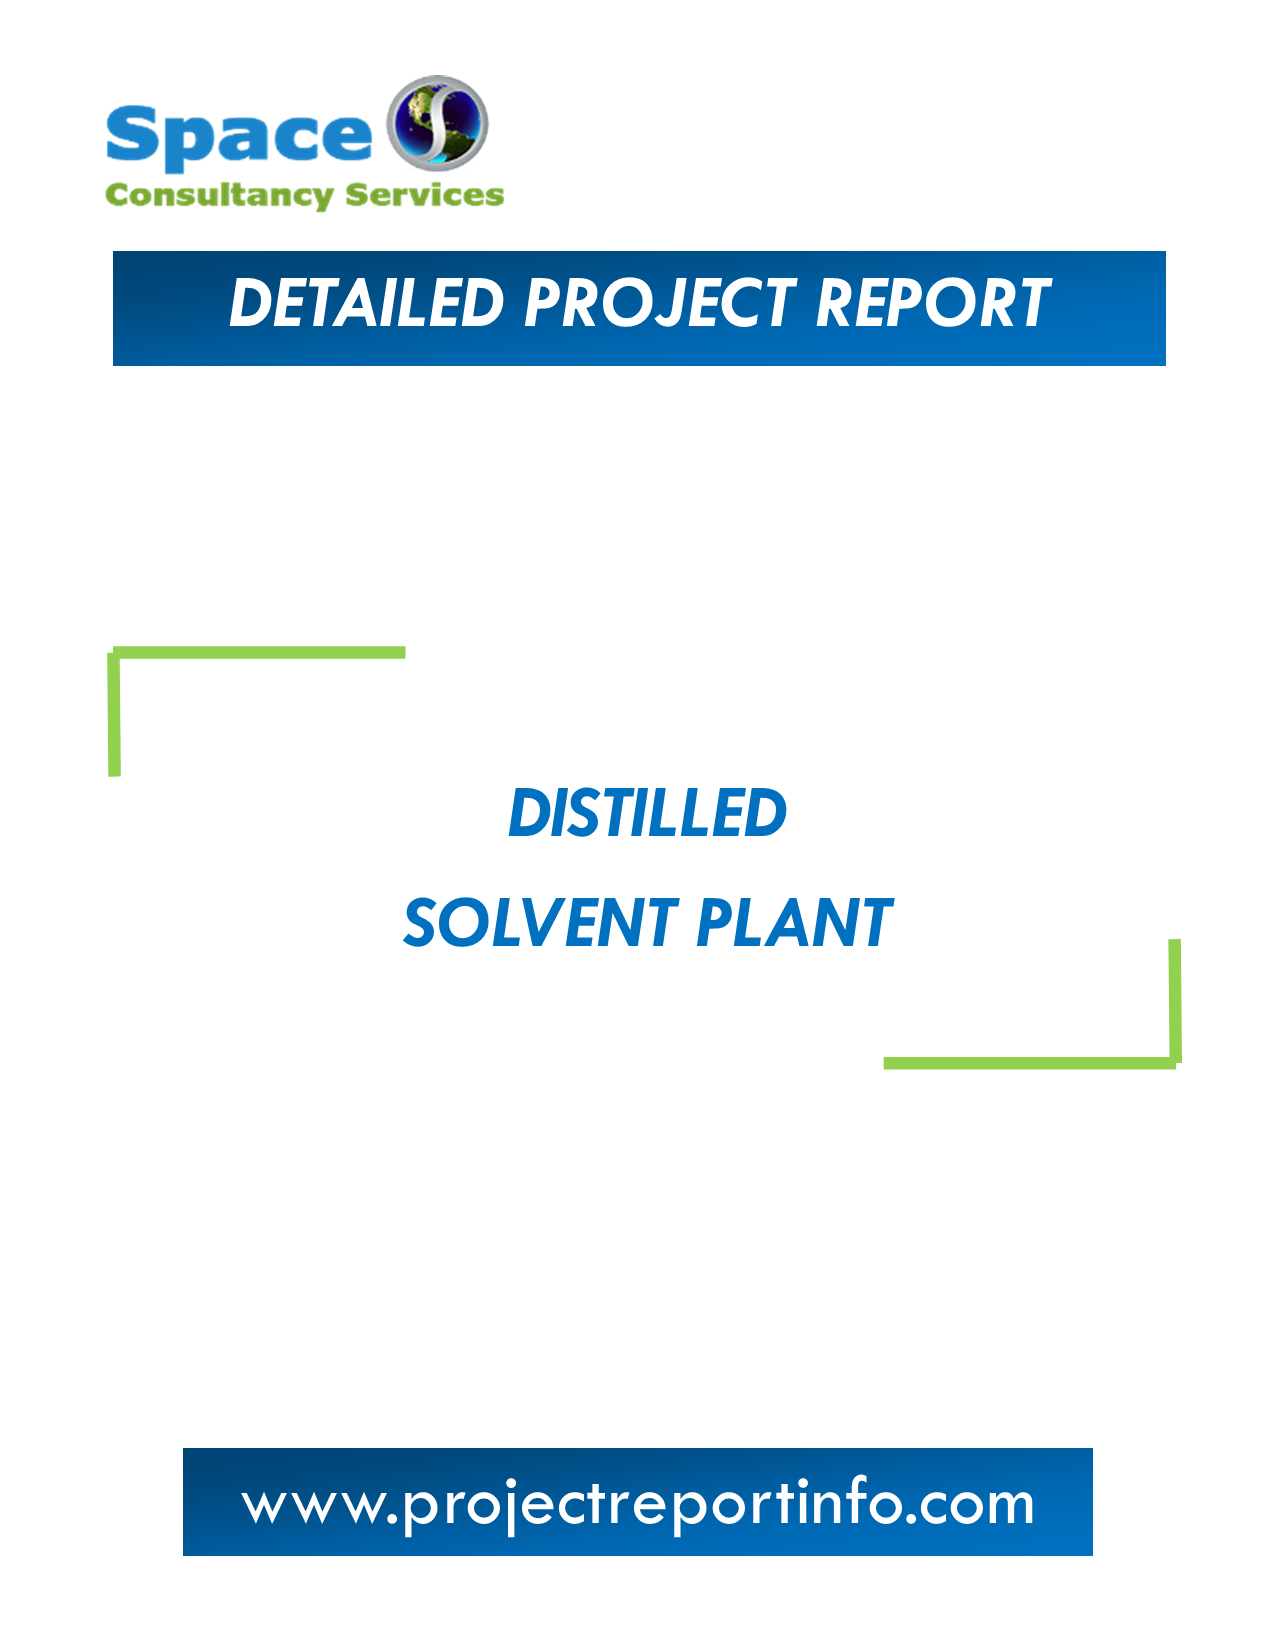 Project Report on Distilled Solvent Plant